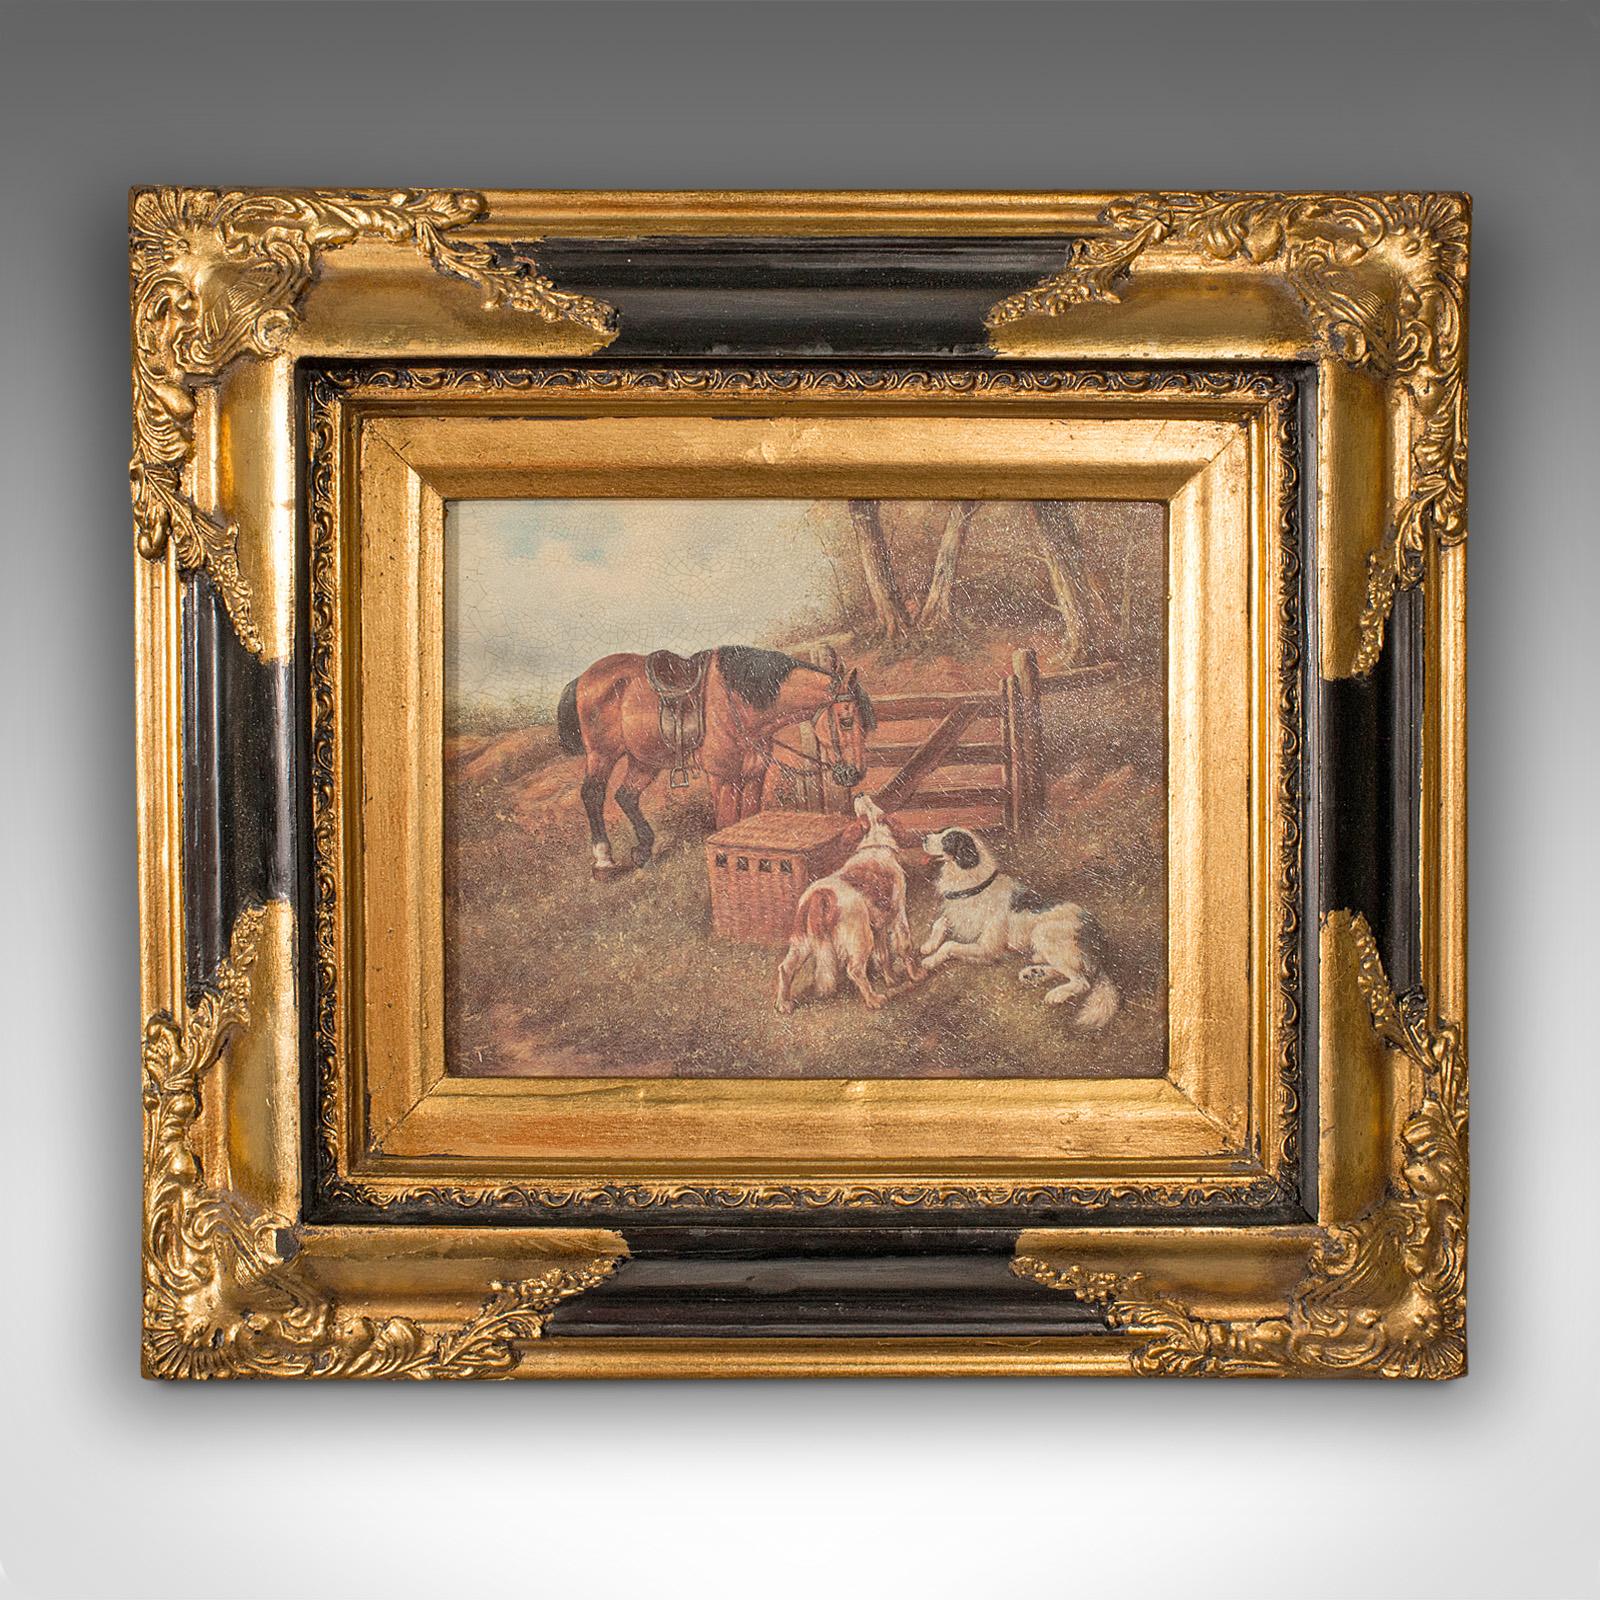 This is a small vintage rural scene. An English, gilt framed decorative picture with countryside and equine appeal, dating to the late 20th century, circa 1980.

Deeply framed with a charming animal scene
Displays a desirable aged patina, one